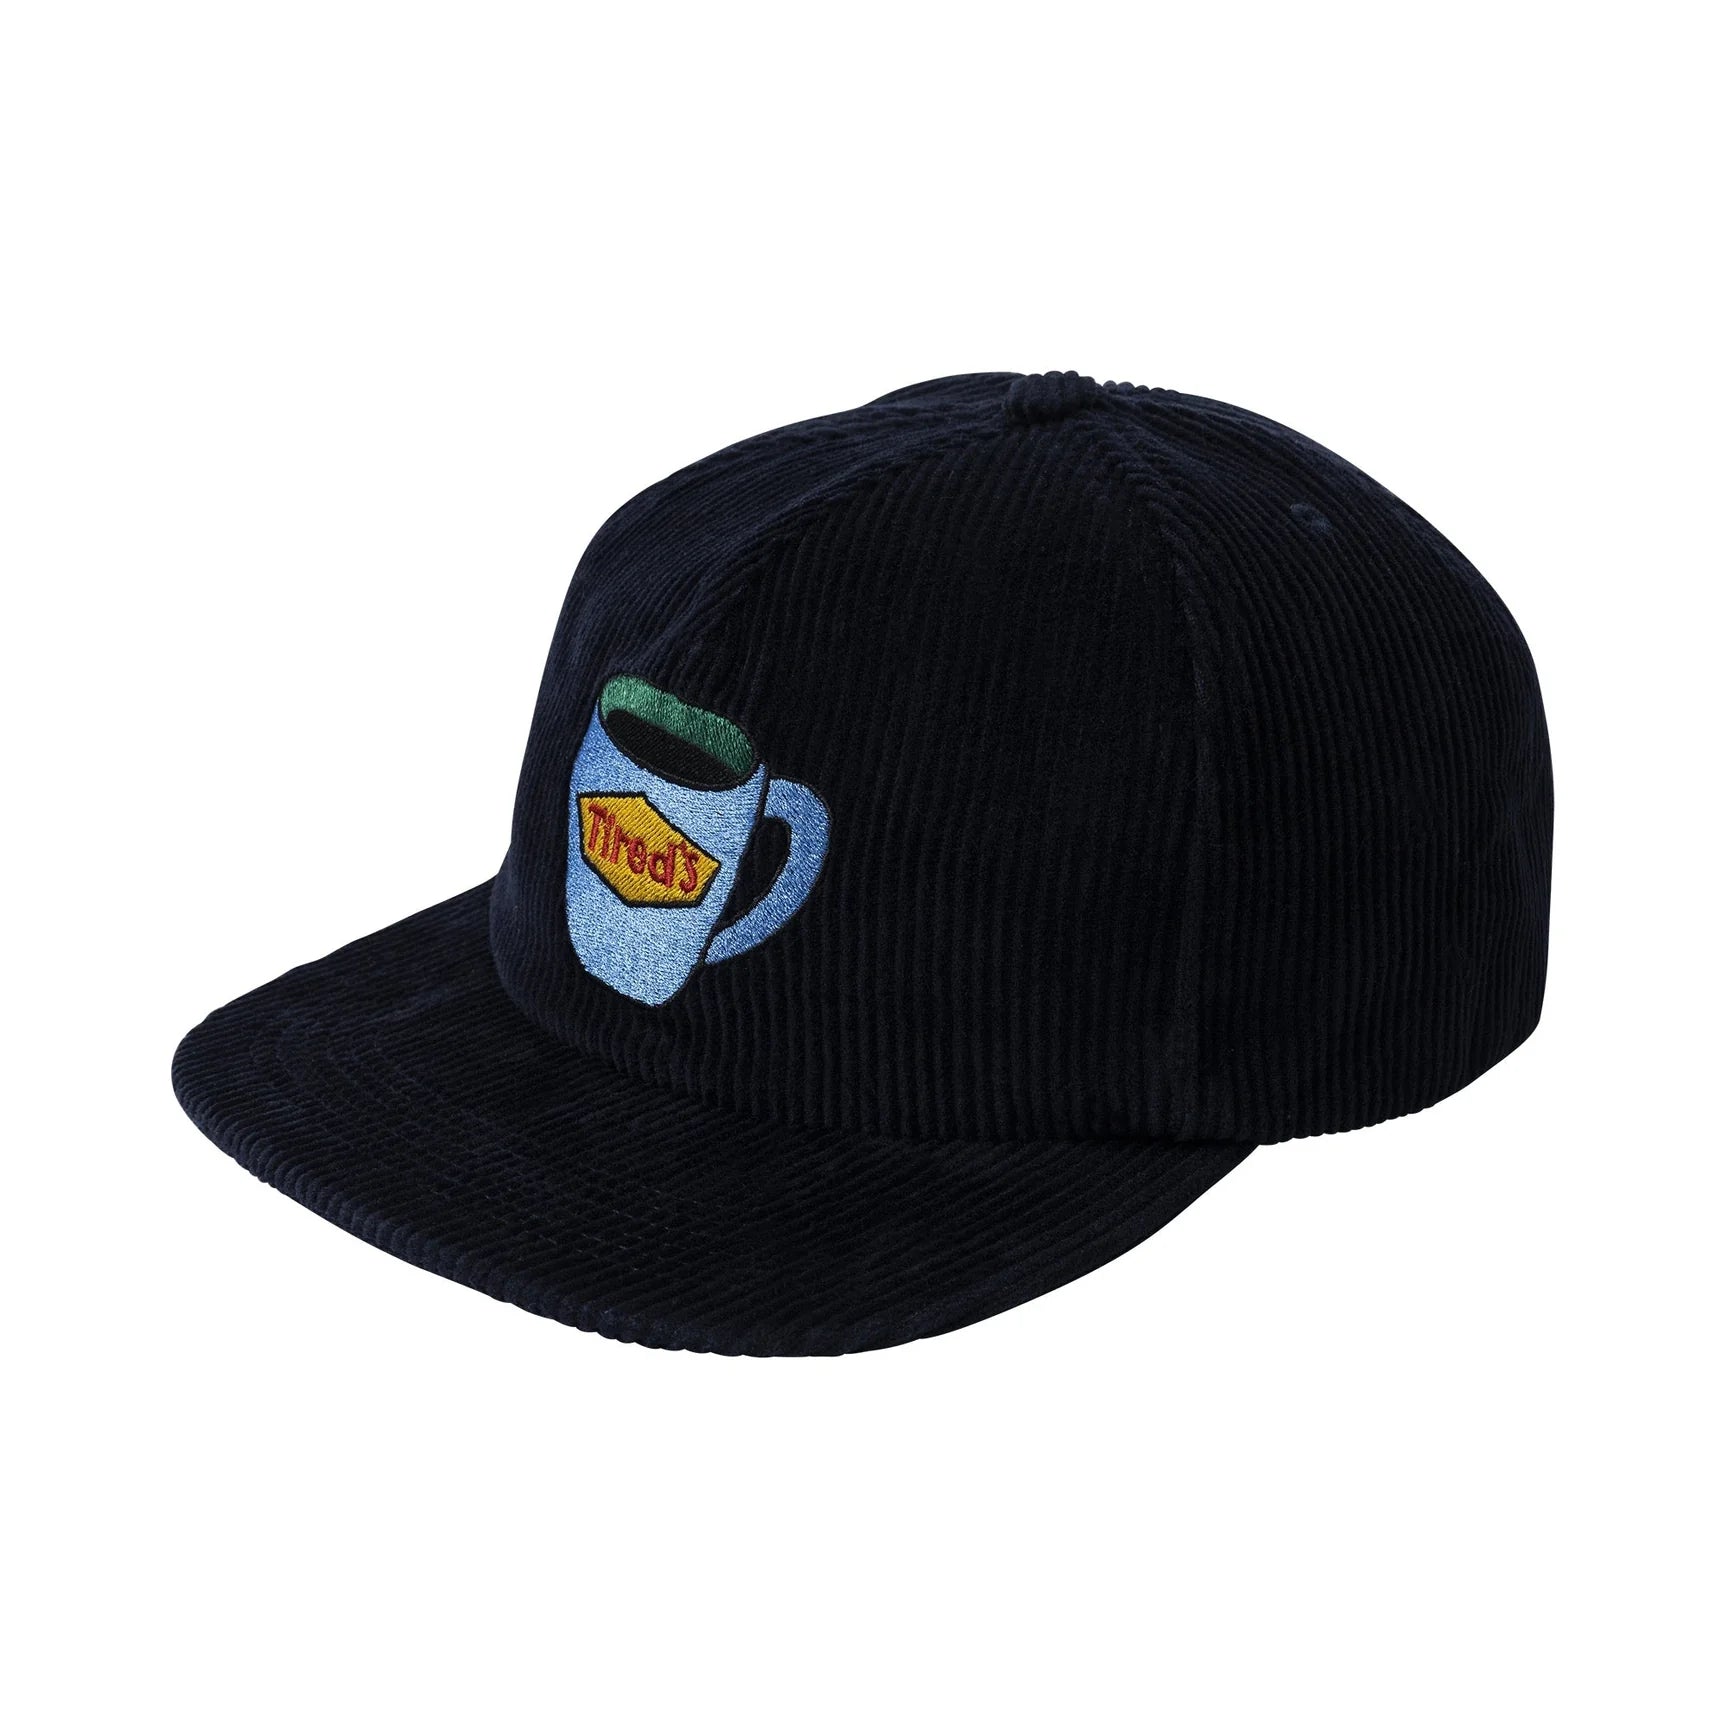 TIRED'S WASHED CORD CAP NAVY